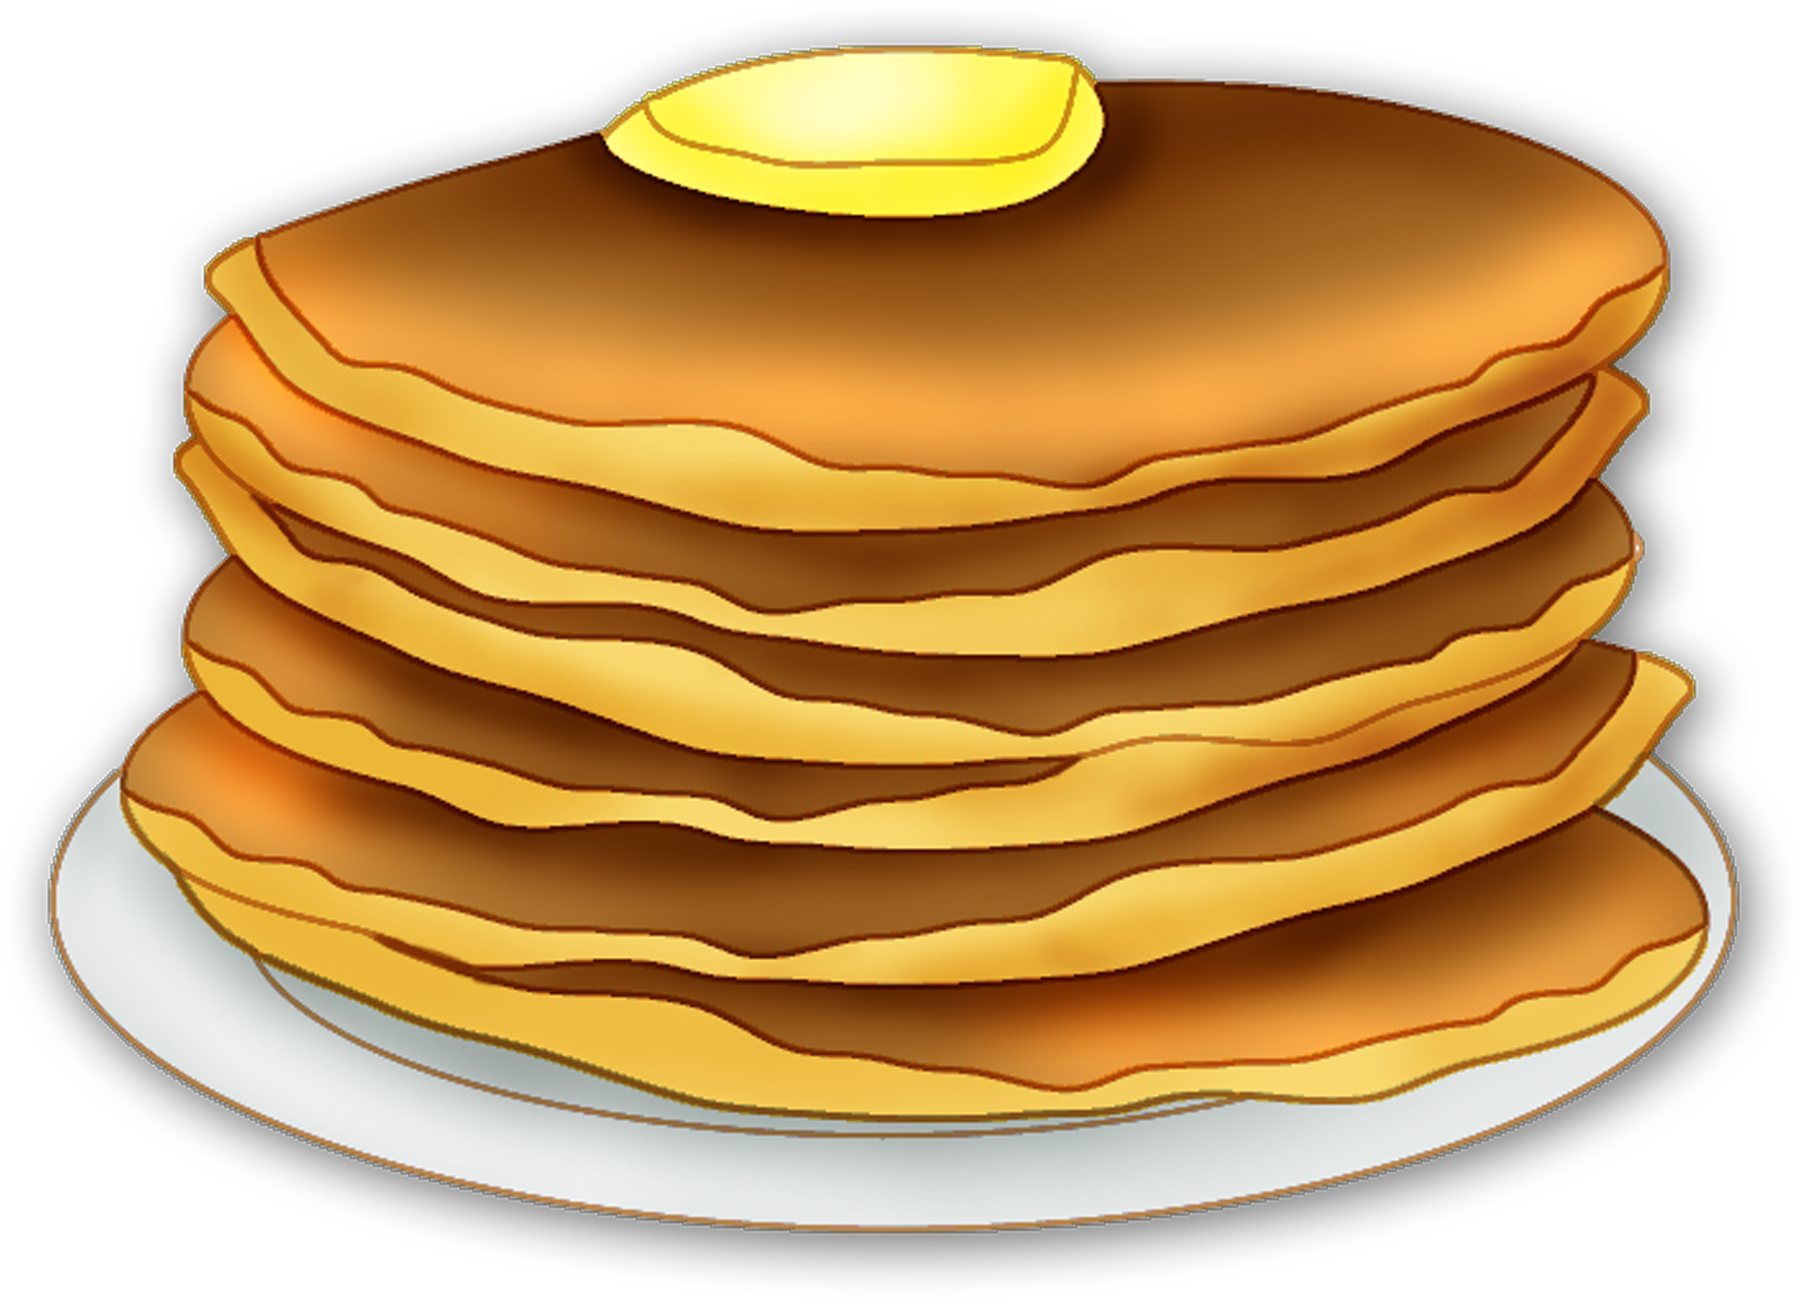 Images Pancakes Clipart Page 2 u0026middot; Pancake Clipart Free